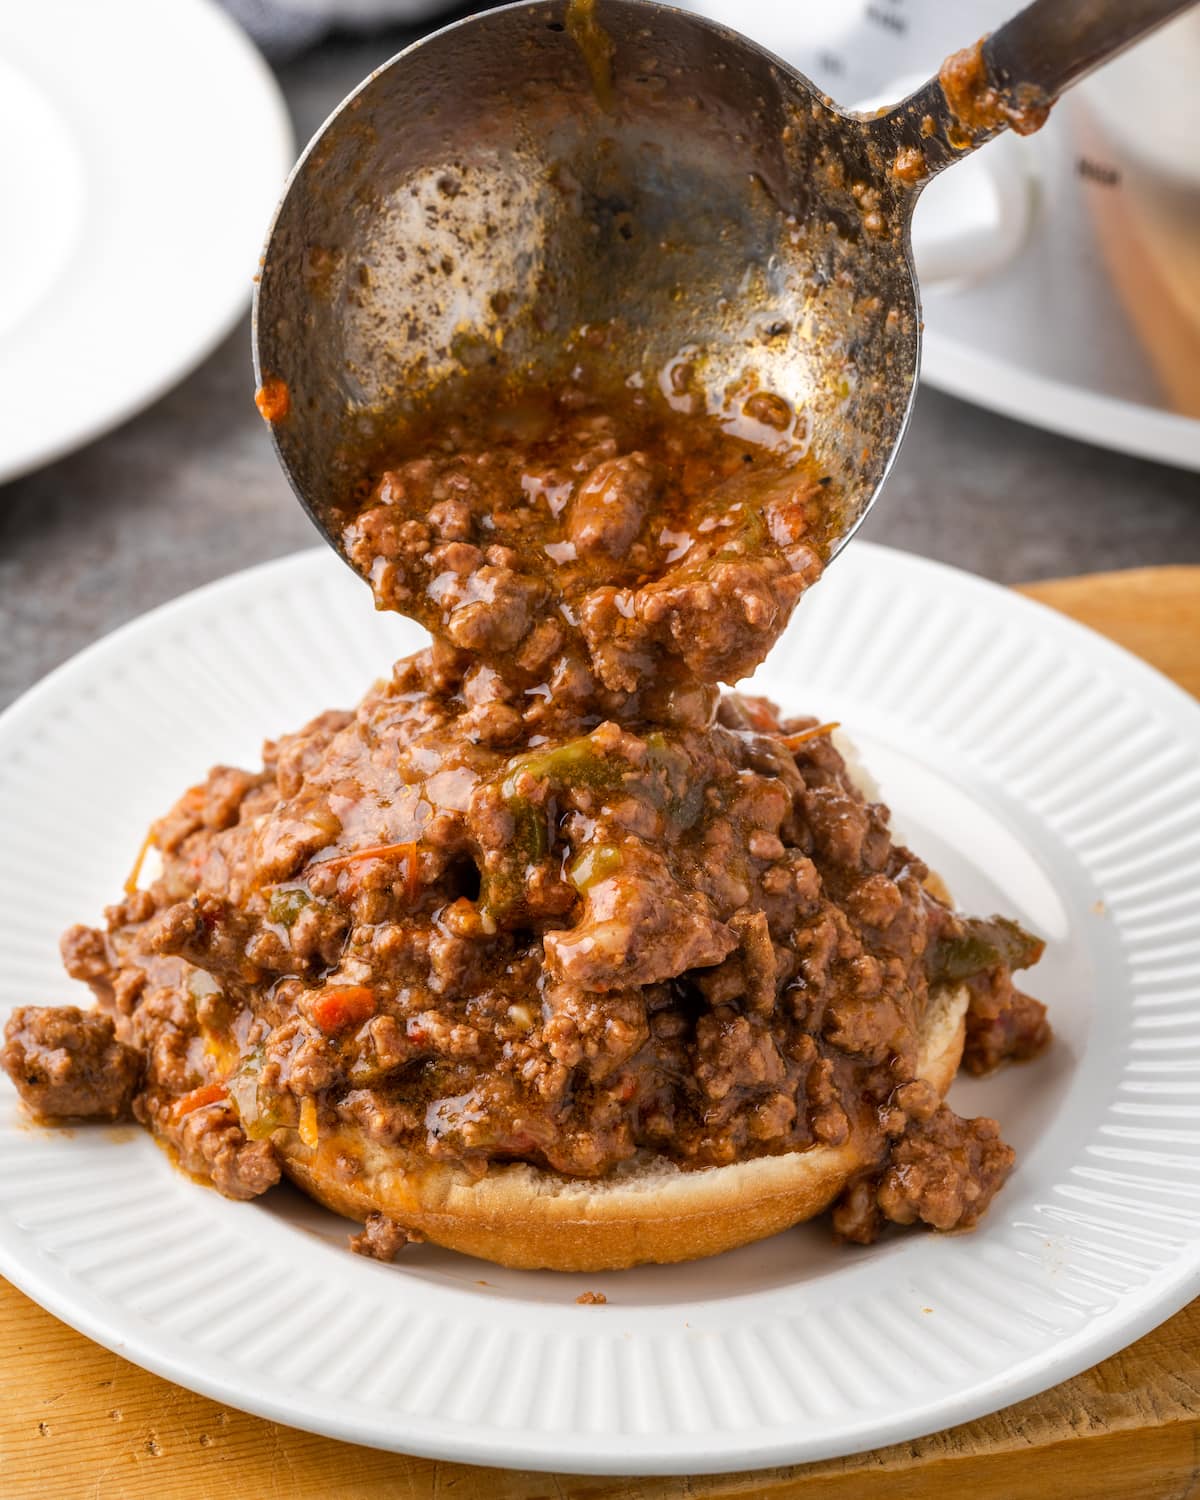 A ladle scoops Philly Cheesesteak Sloppy Joes over one half of a hamburger bun on a plate.